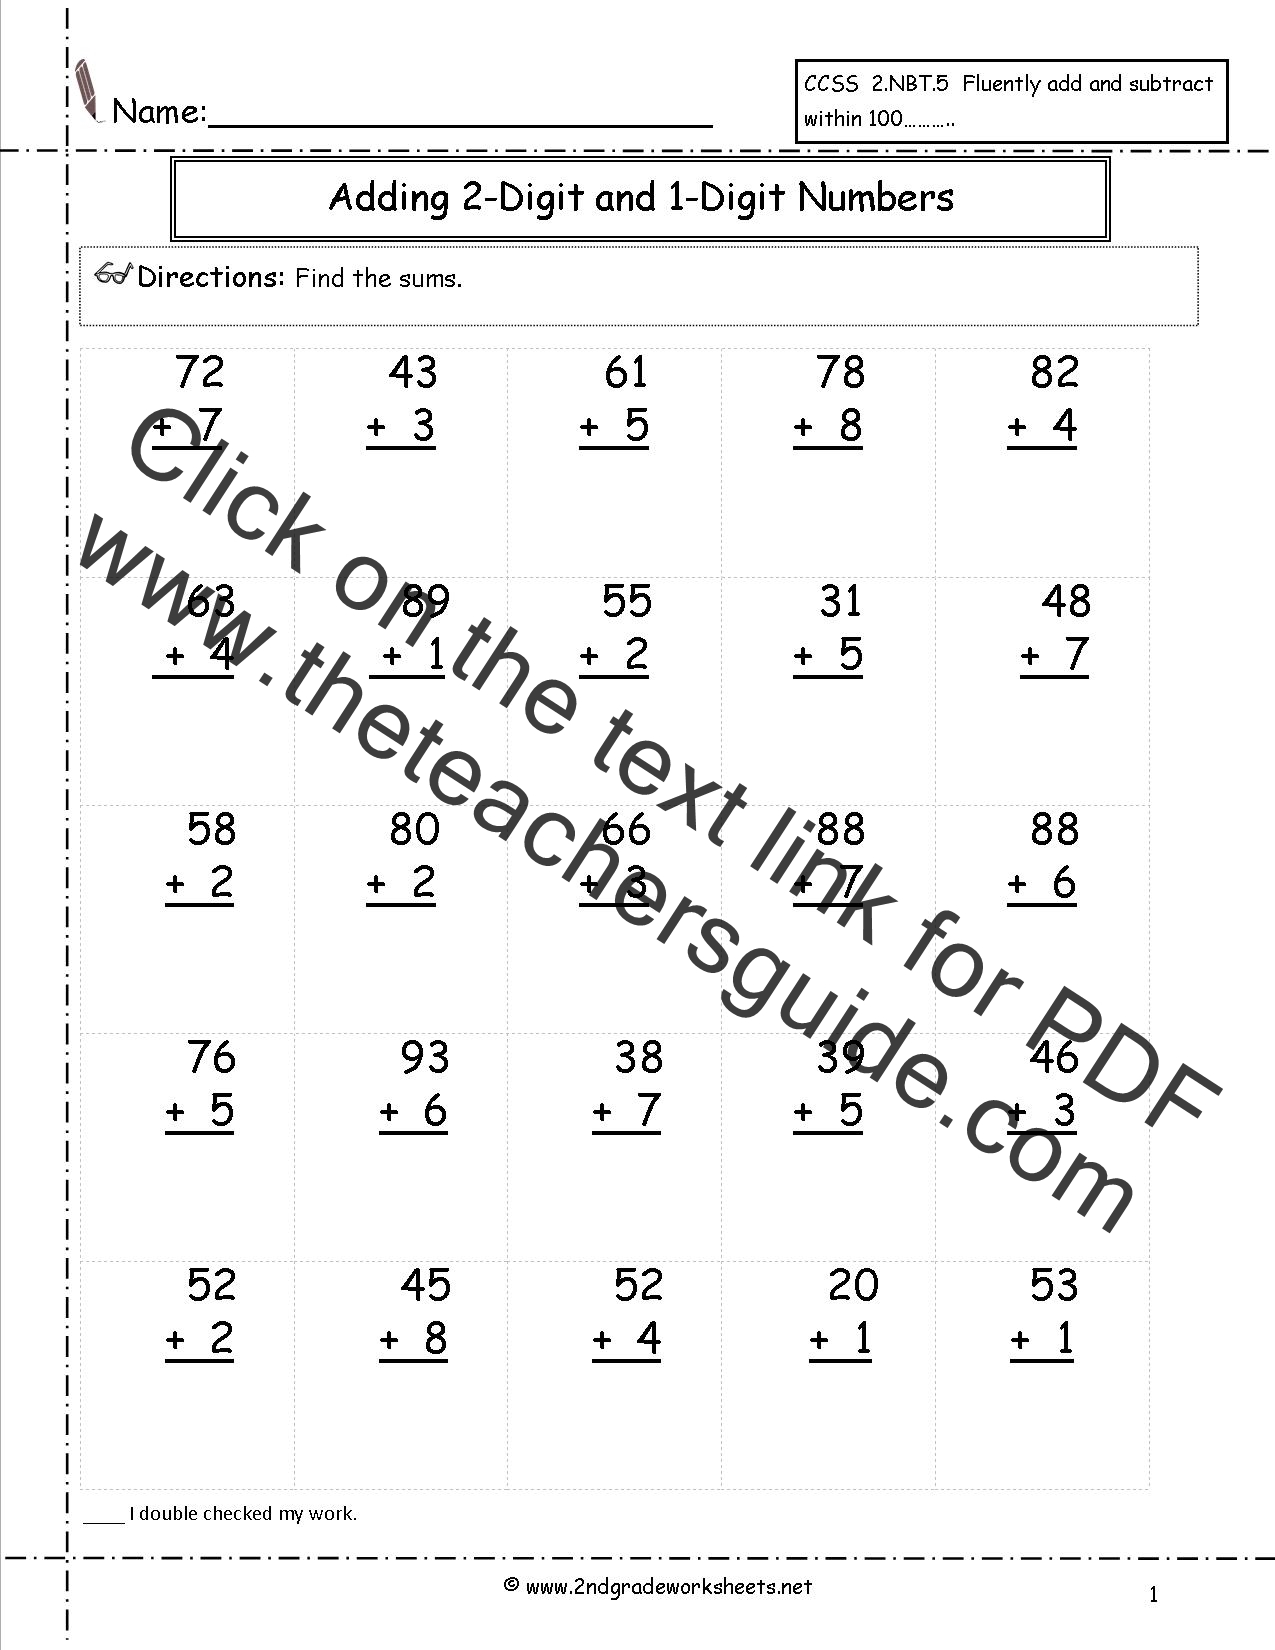 Adding Two Digit And One Digit Numbers 2nd Grade Math Worksheets Free Math Worksheets Math